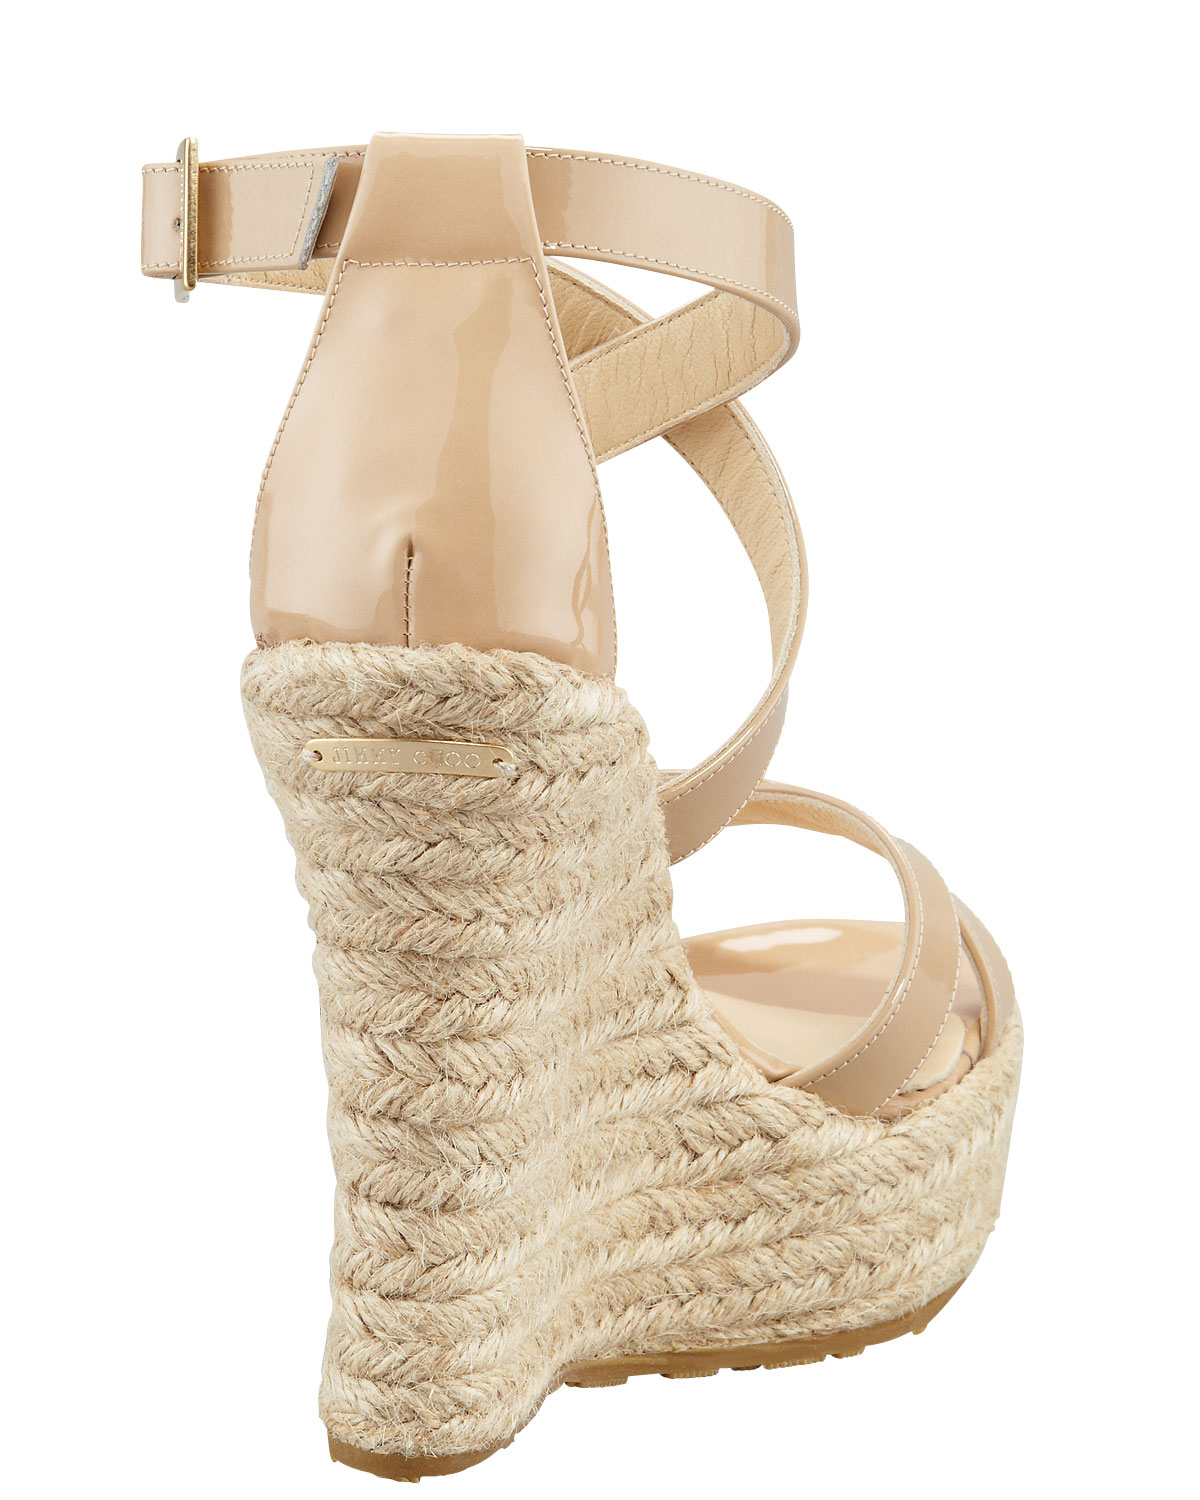 Jimmy choo Porto Patent Leather Espadrille Wedge Sandals in Natural | Lyst